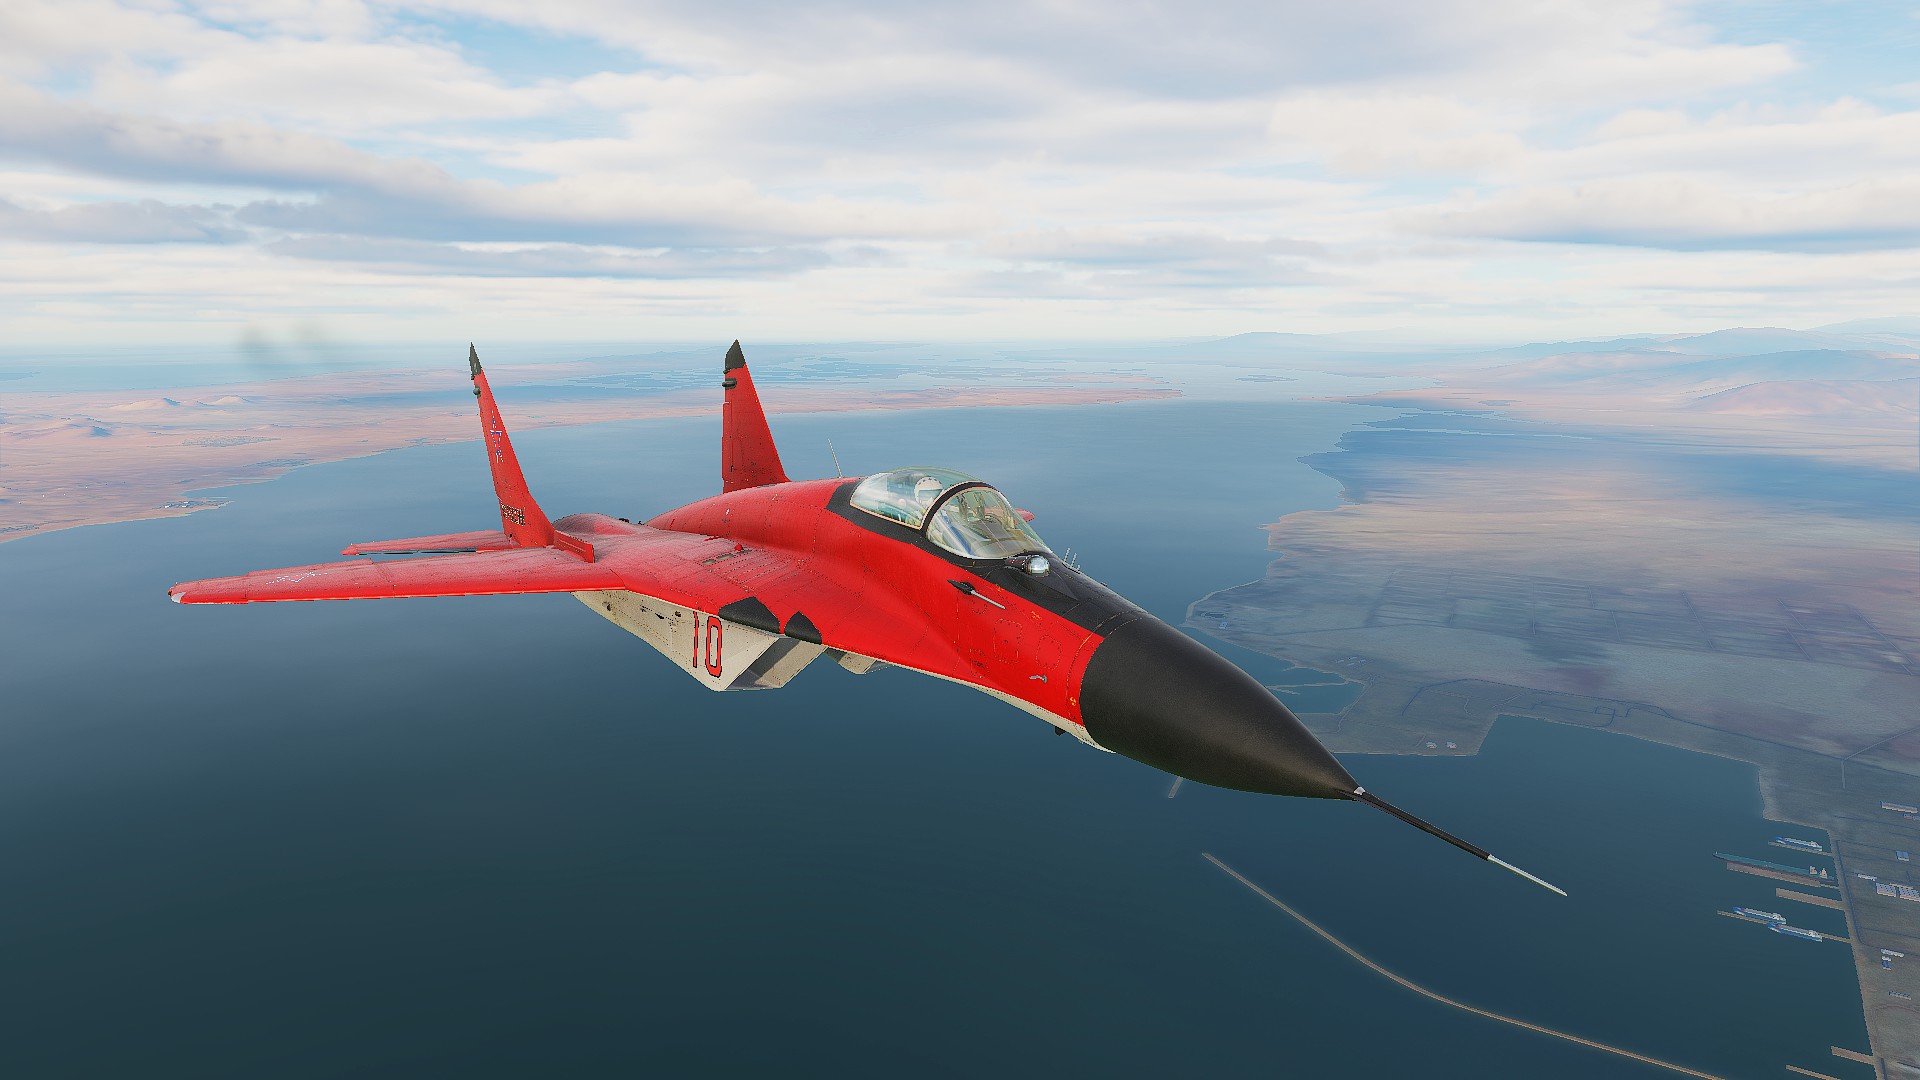 MiG-29S Red Star (Fictional)